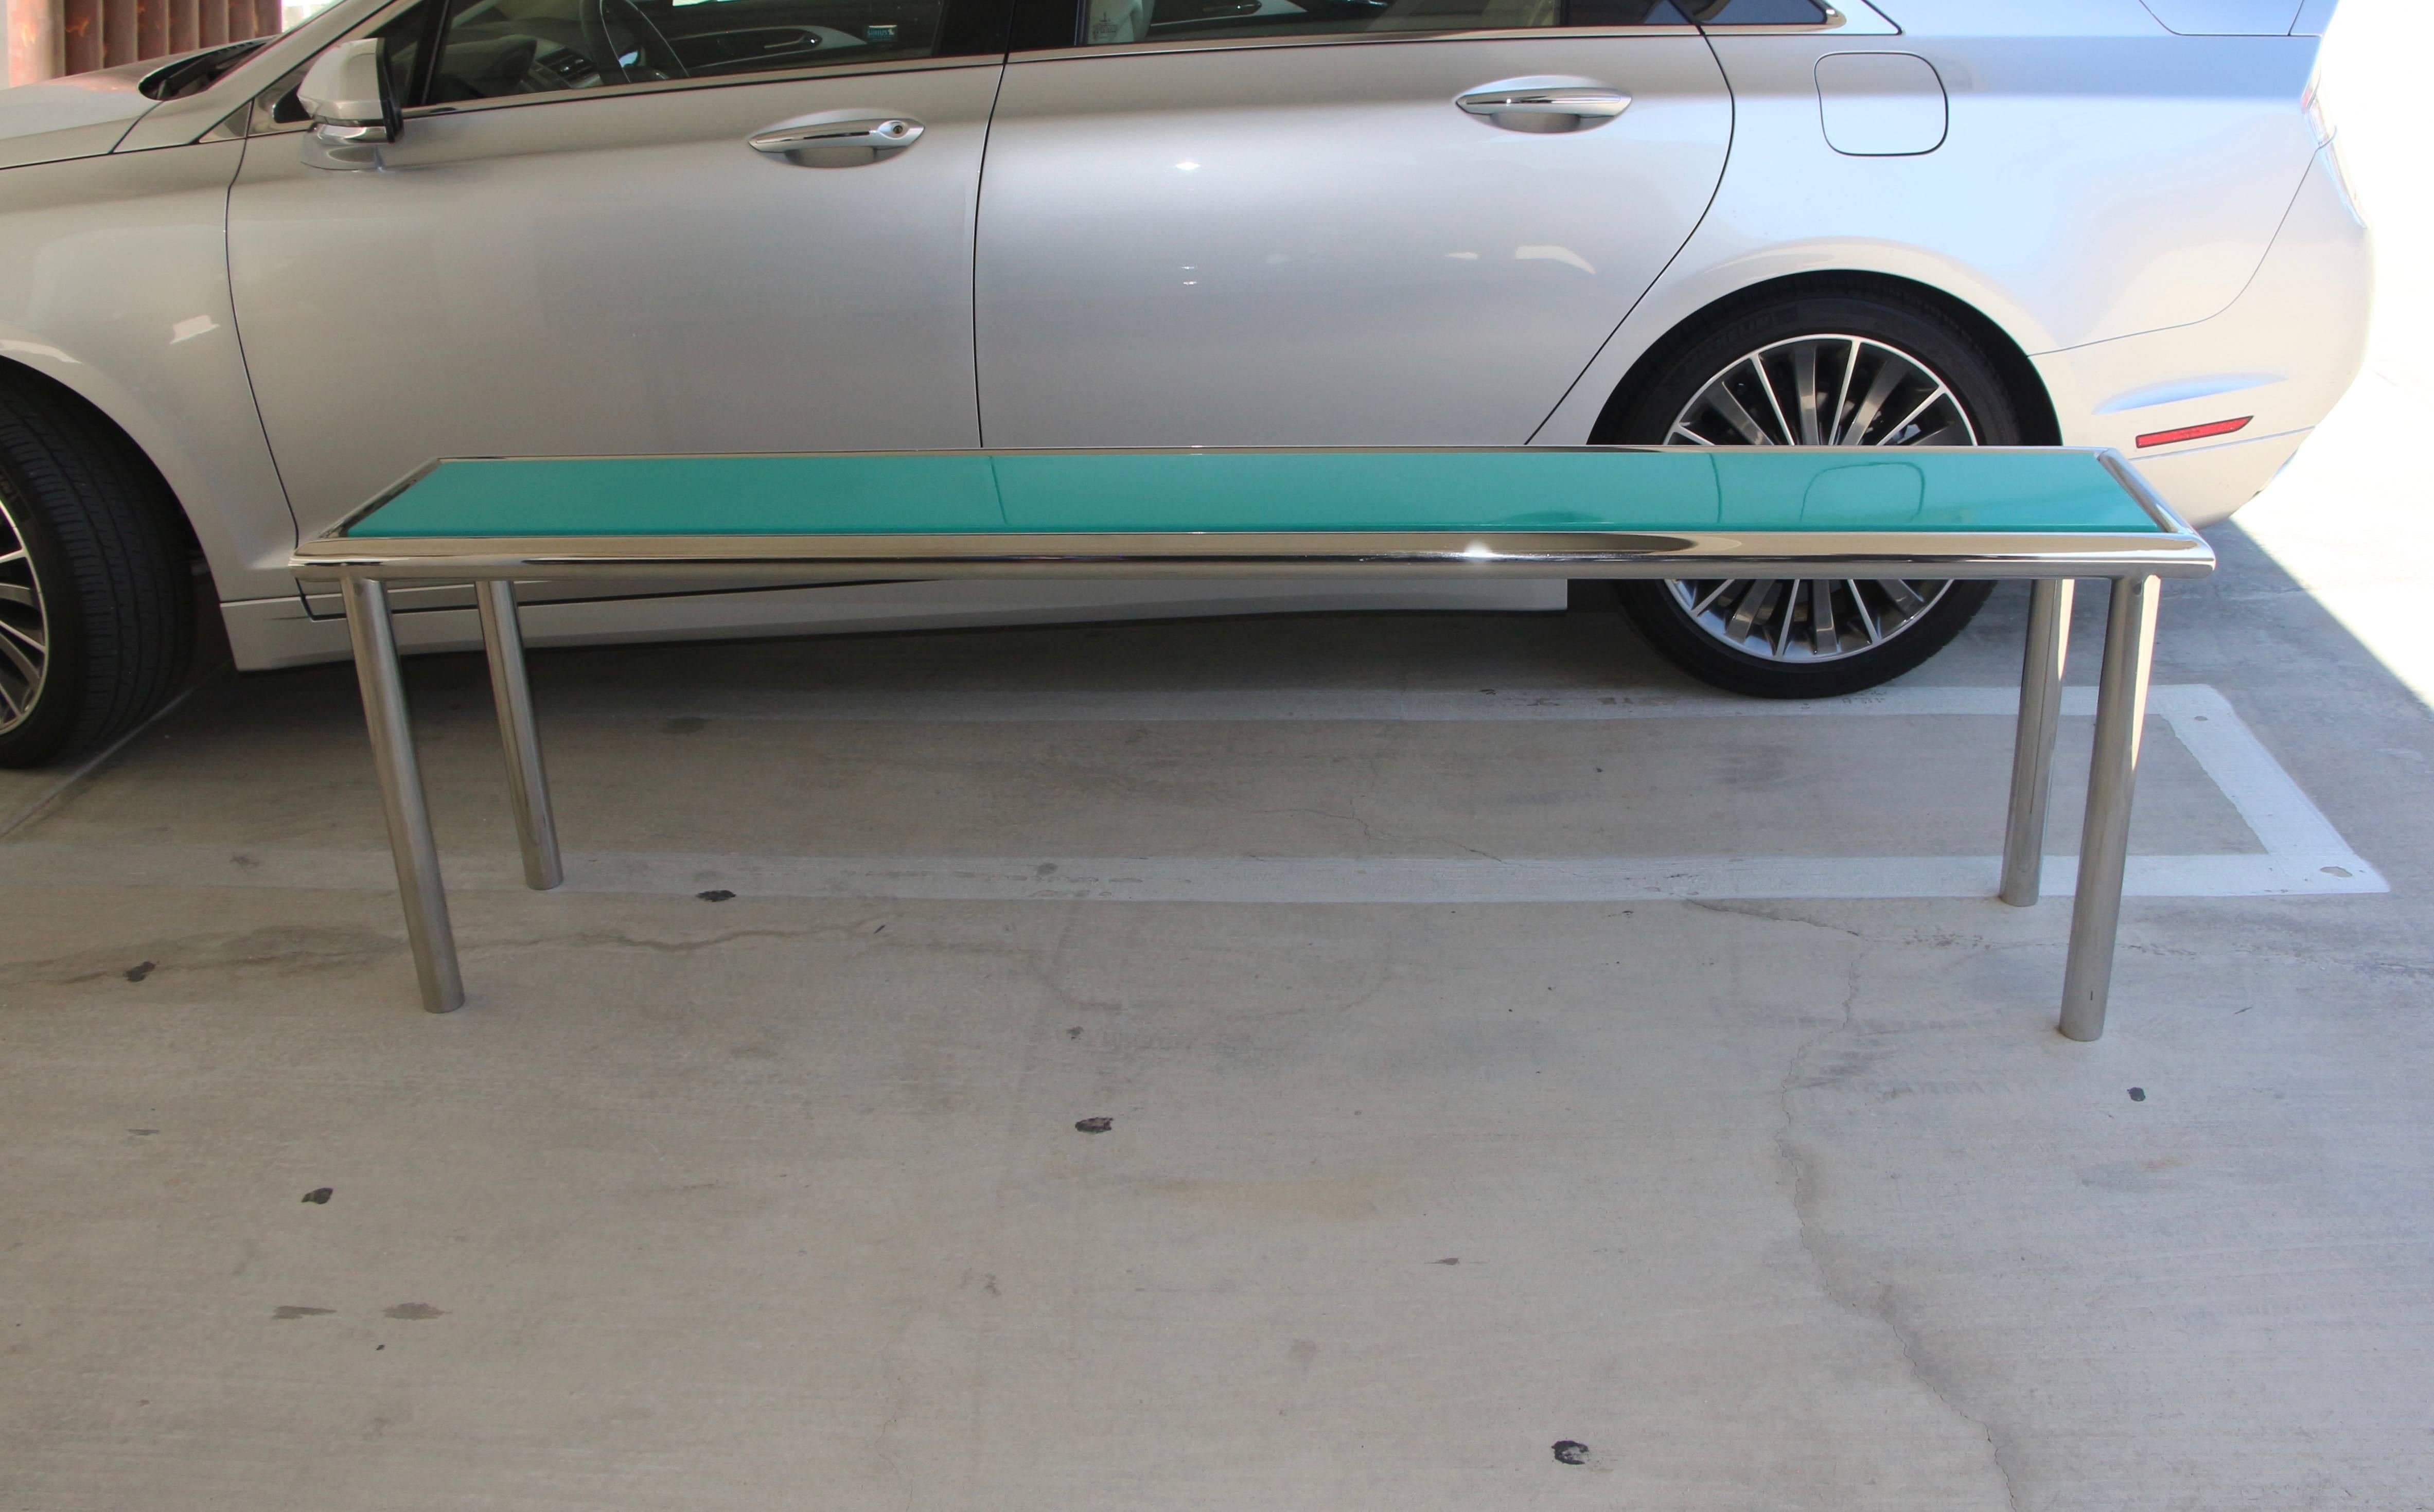 A nice interesting sofa table or console that is 7 feet long. It has a chrome tubular frame with a highly lacquered wood top in a shade of turquoise. It is quite sturdy as you can see from the support system in the picture taken from below. The